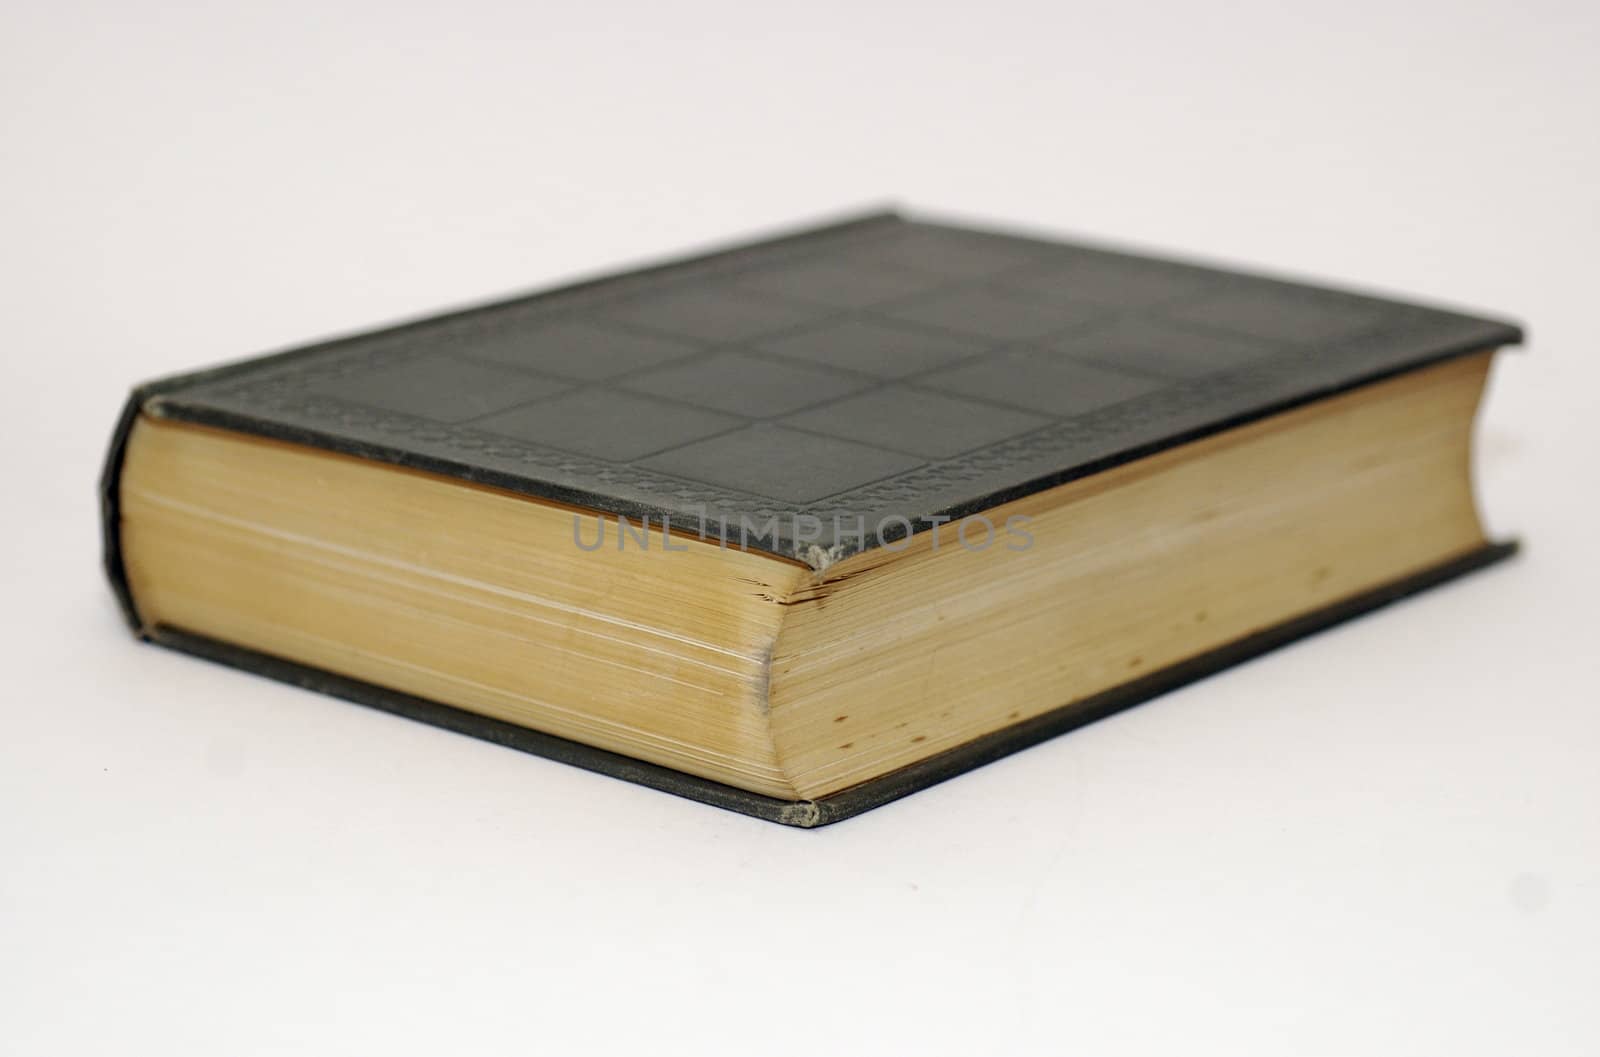 One leather bound, old fashioned book against a white background and copy space